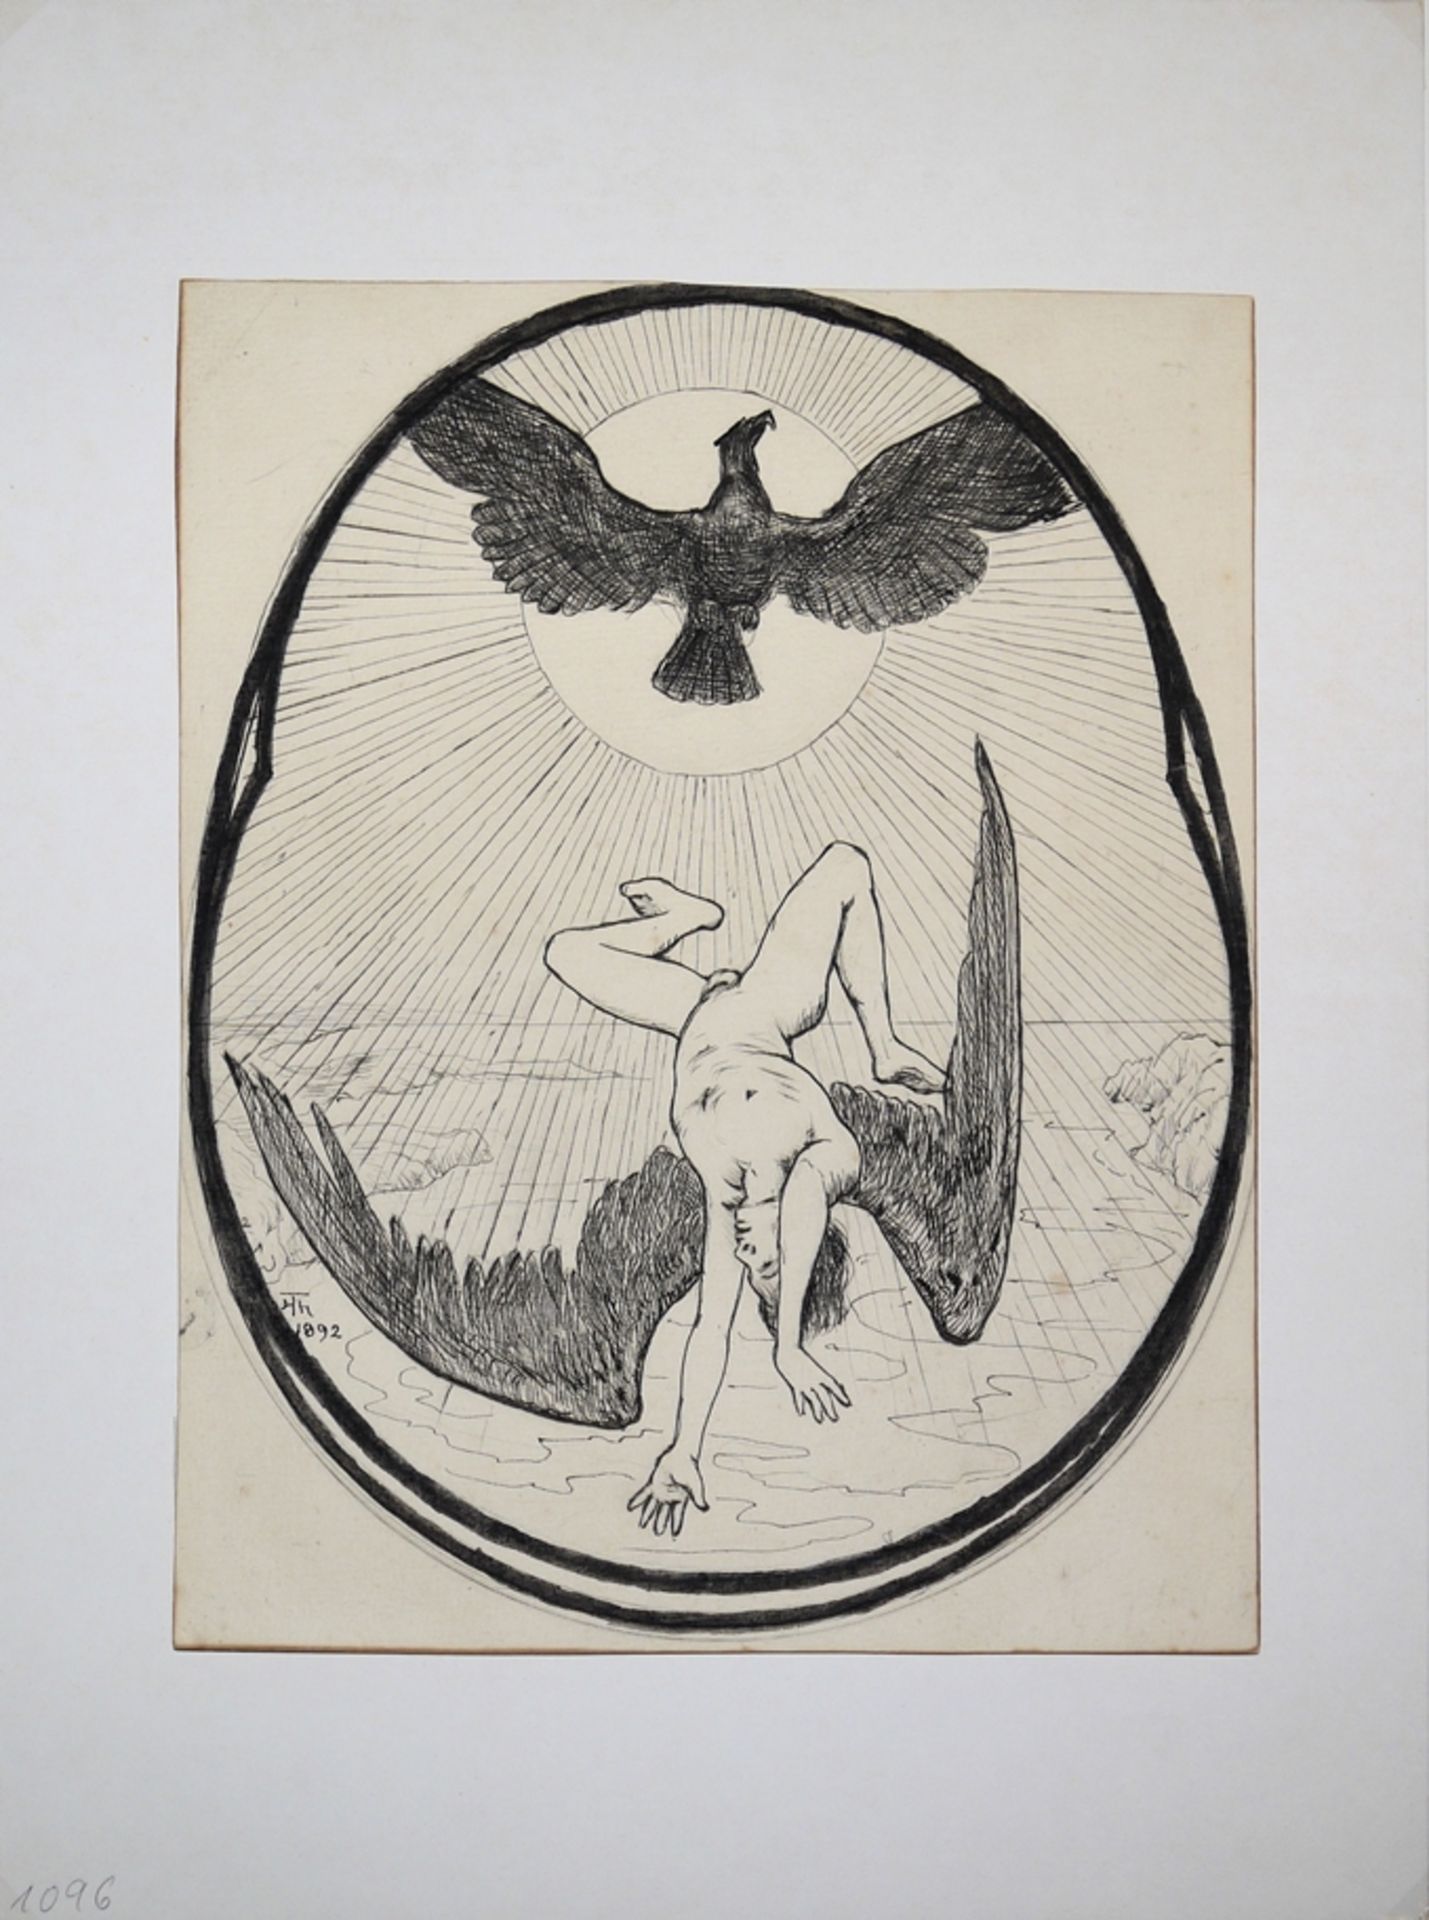 Hans Thoma, Icarus plunges into the sea, ink drawing from 1892, in passepartout